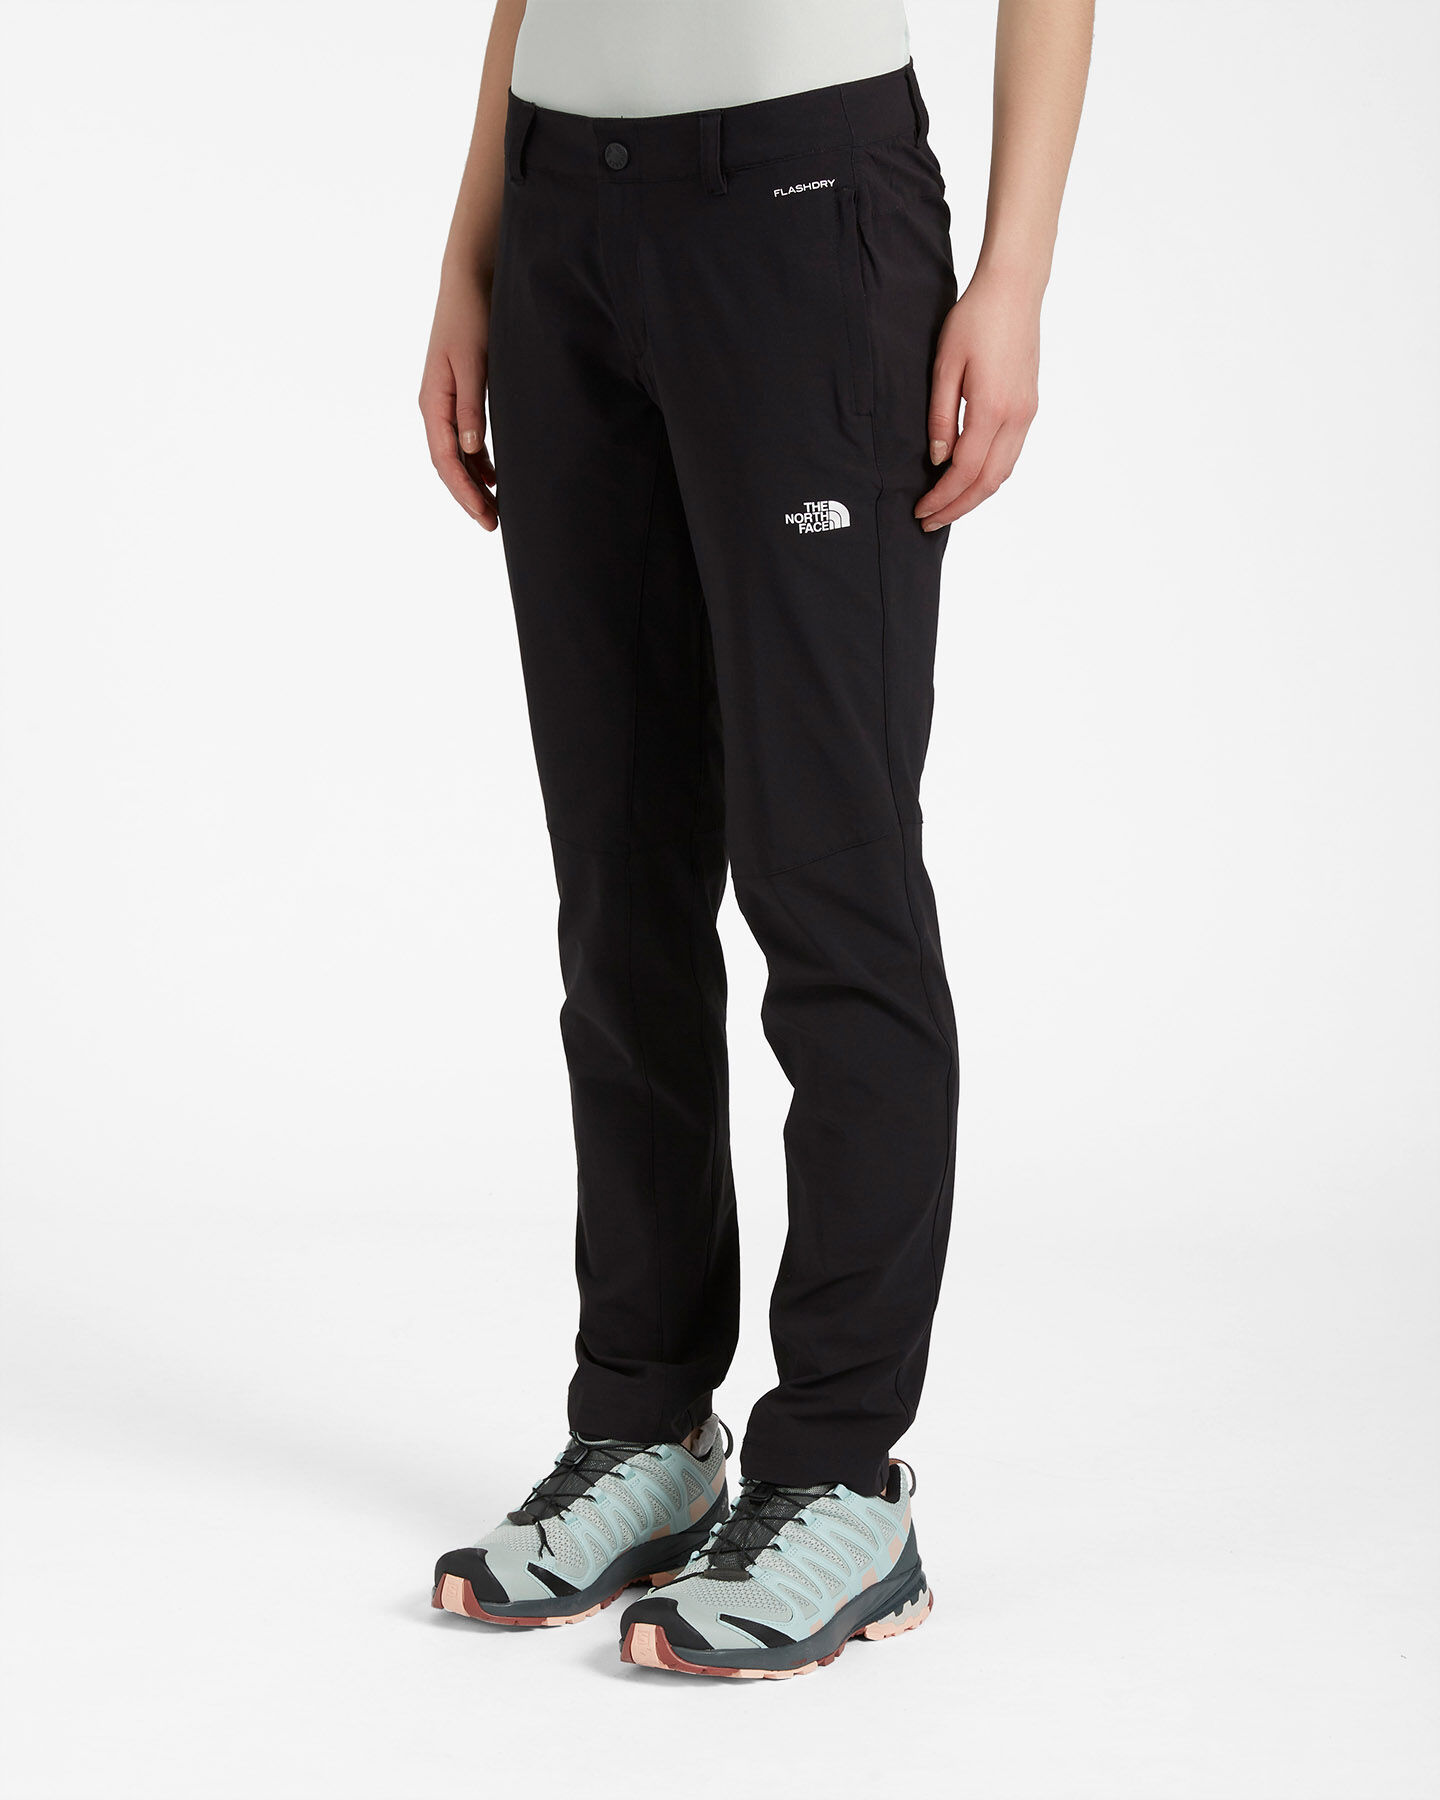  Pantalone outdoor THE NORTH FACE EXTENT IV W S5181585|JK3|REG4 scatto 2